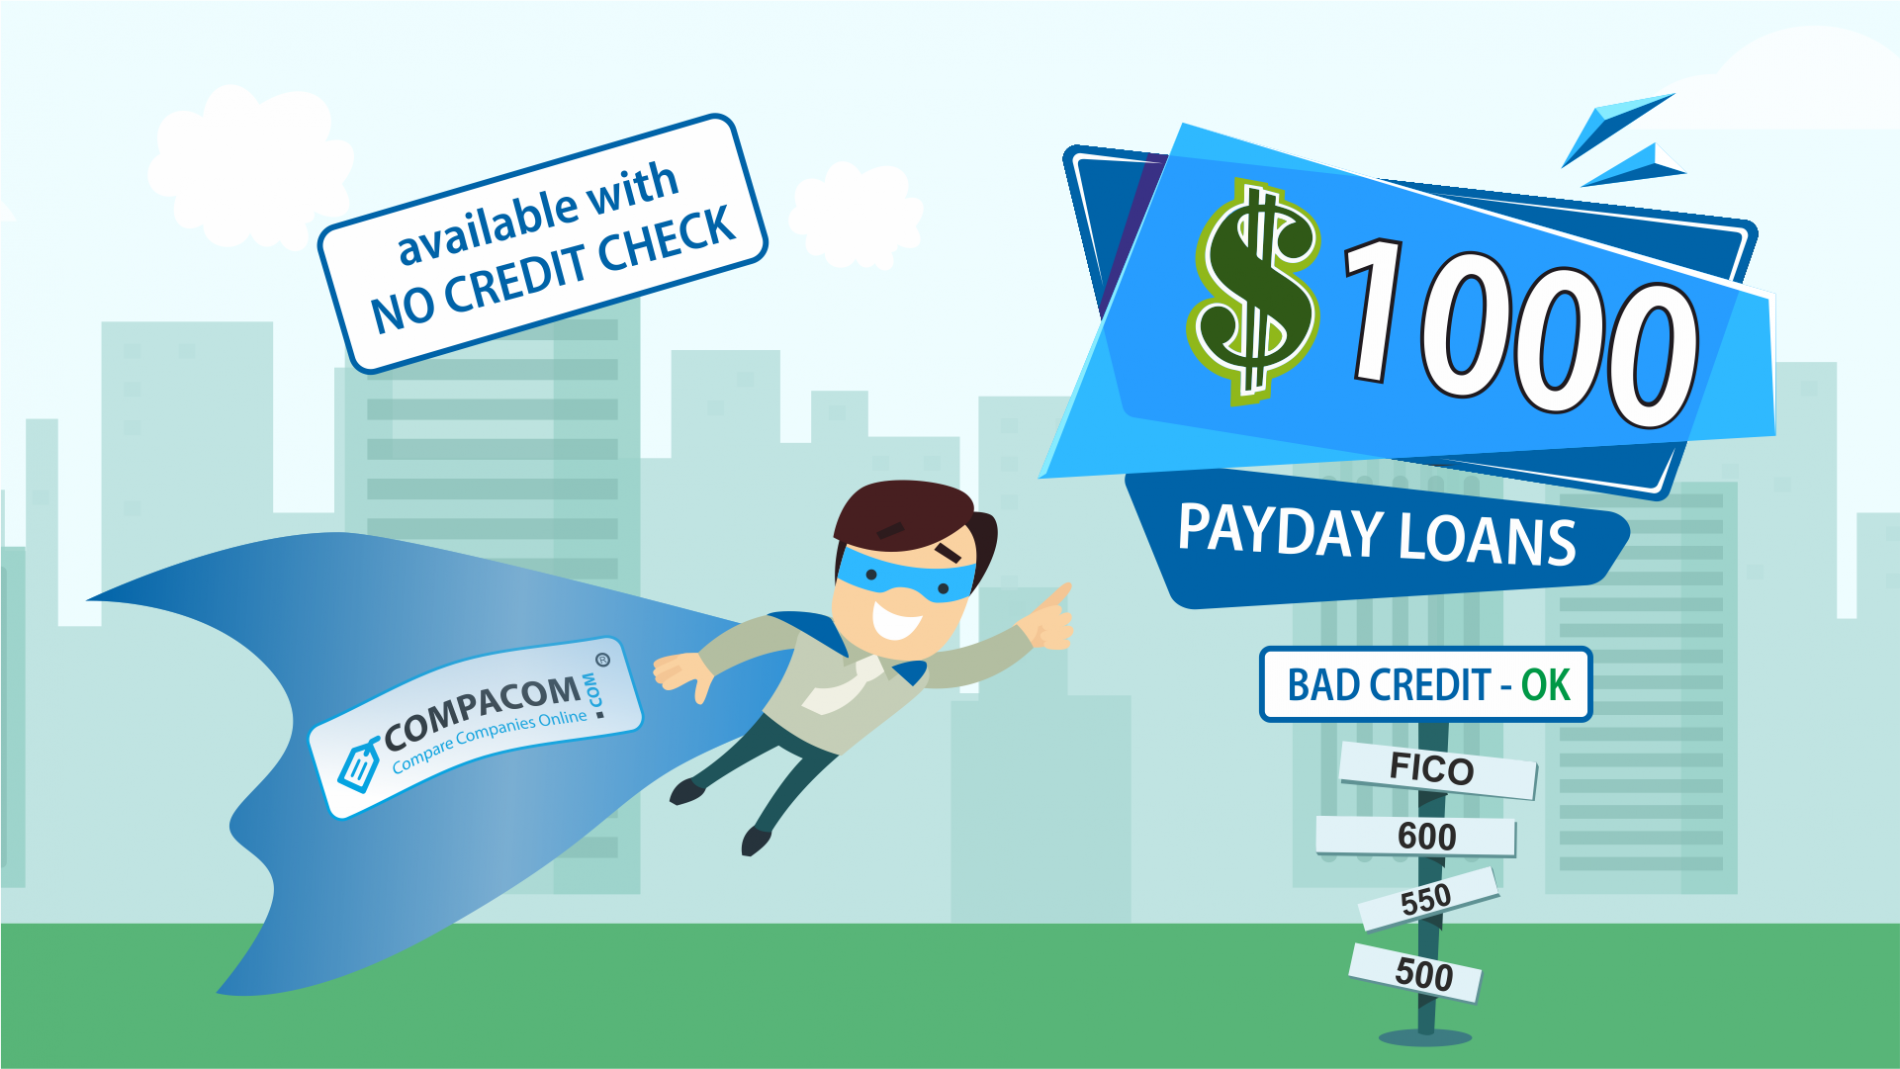 $1,000 Payday Loans for Bad Credit